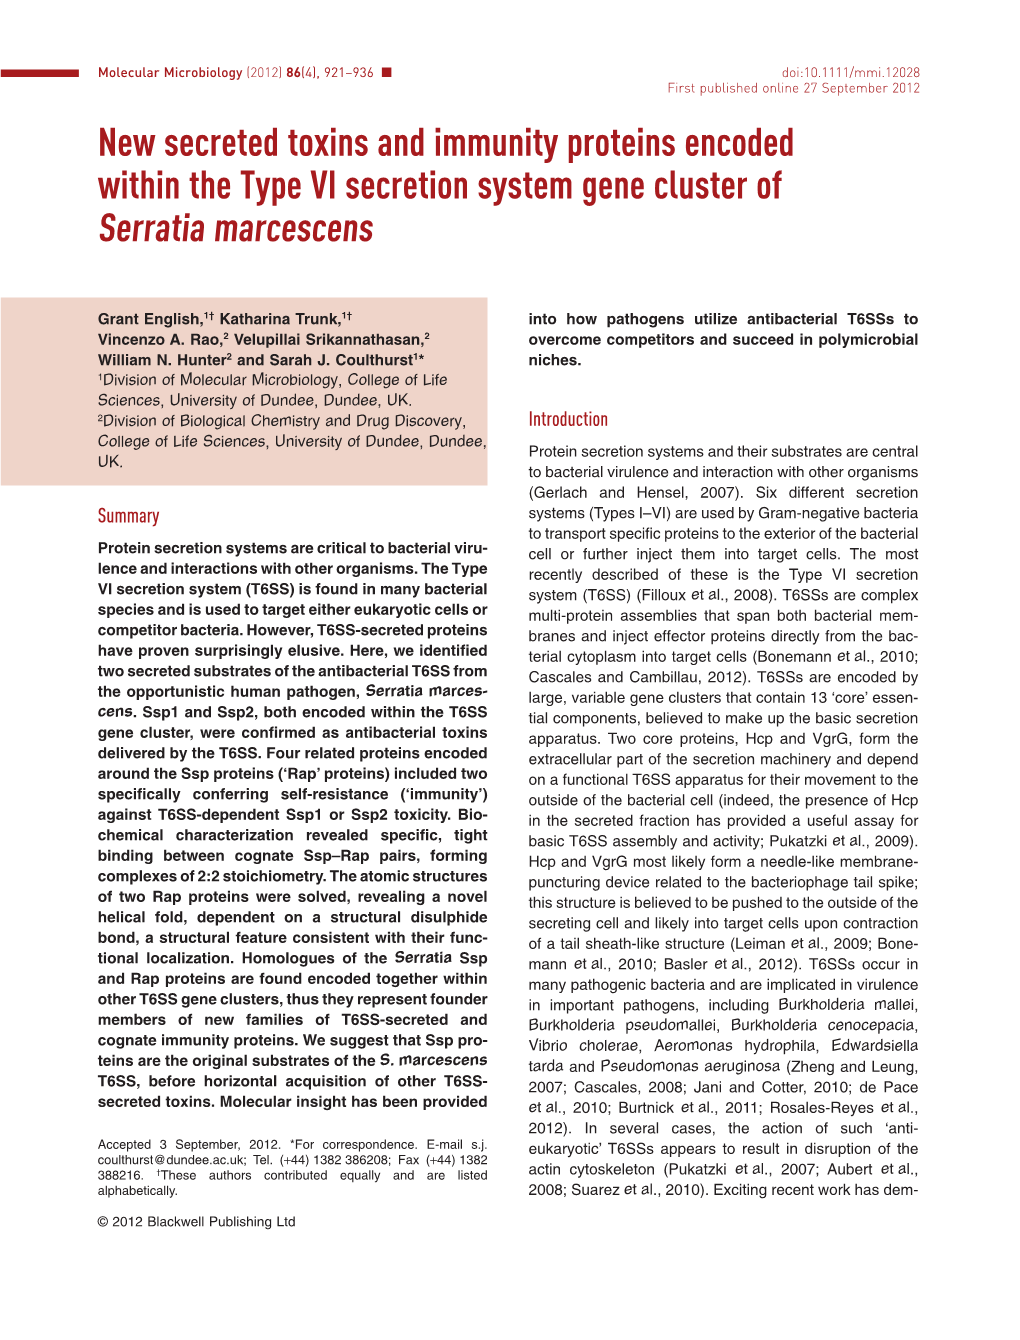 New Secreted Toxins and Immunity Proteins Encoded Within the Type VI Secretion System Gene Cluster of Serratia Marcescens